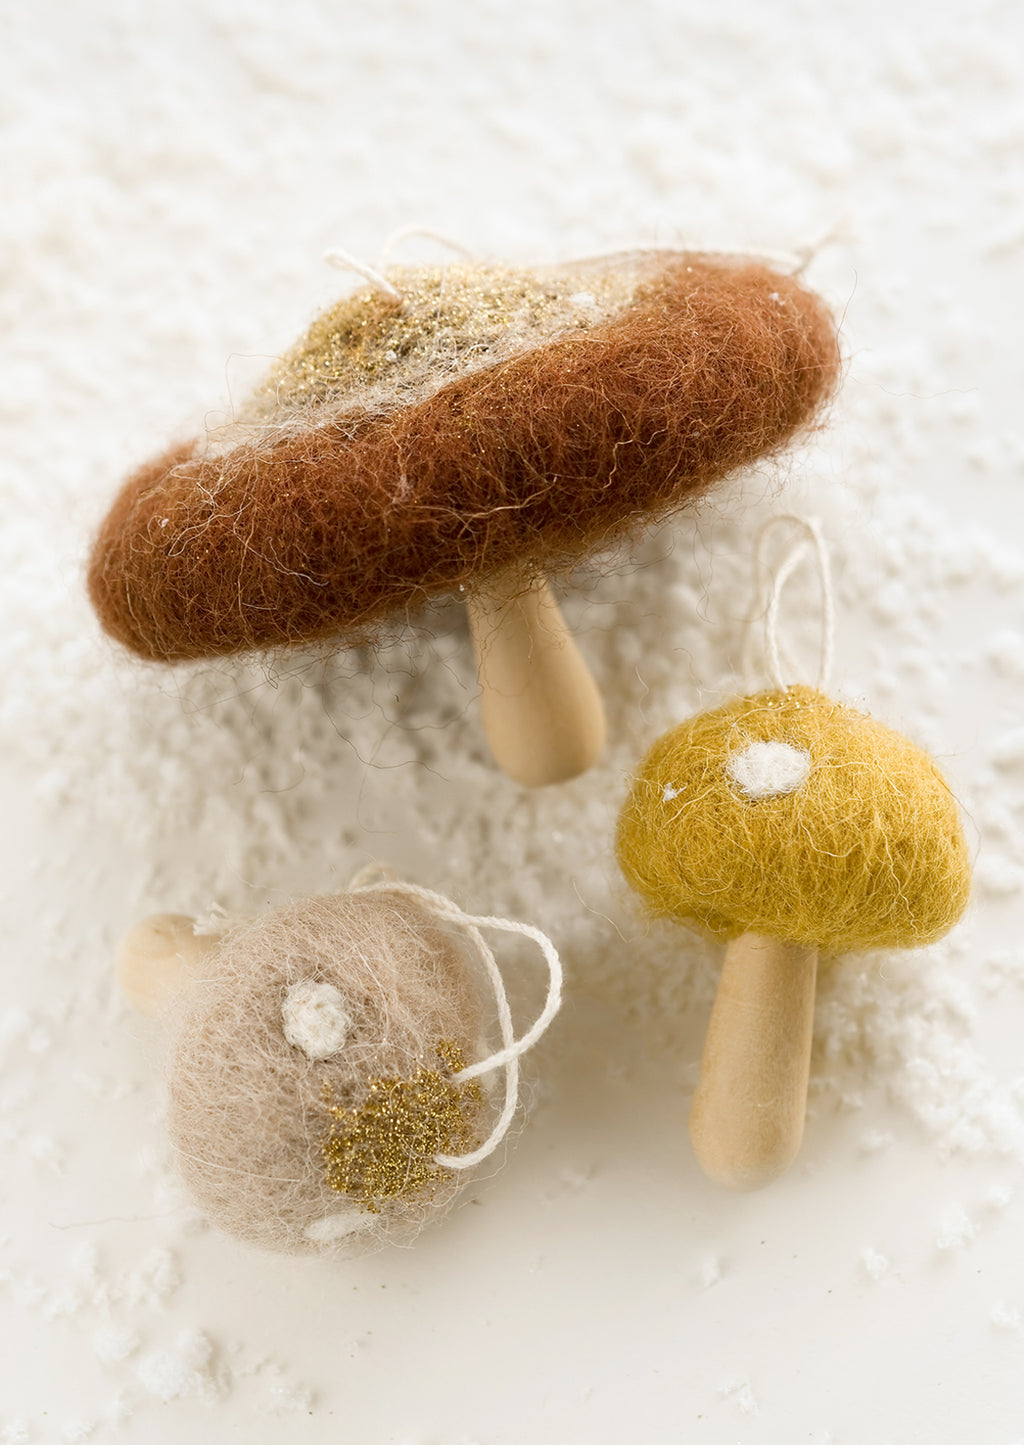 2: Mushroom ornaments in assorted colors with felted tops and wooden "stumps".